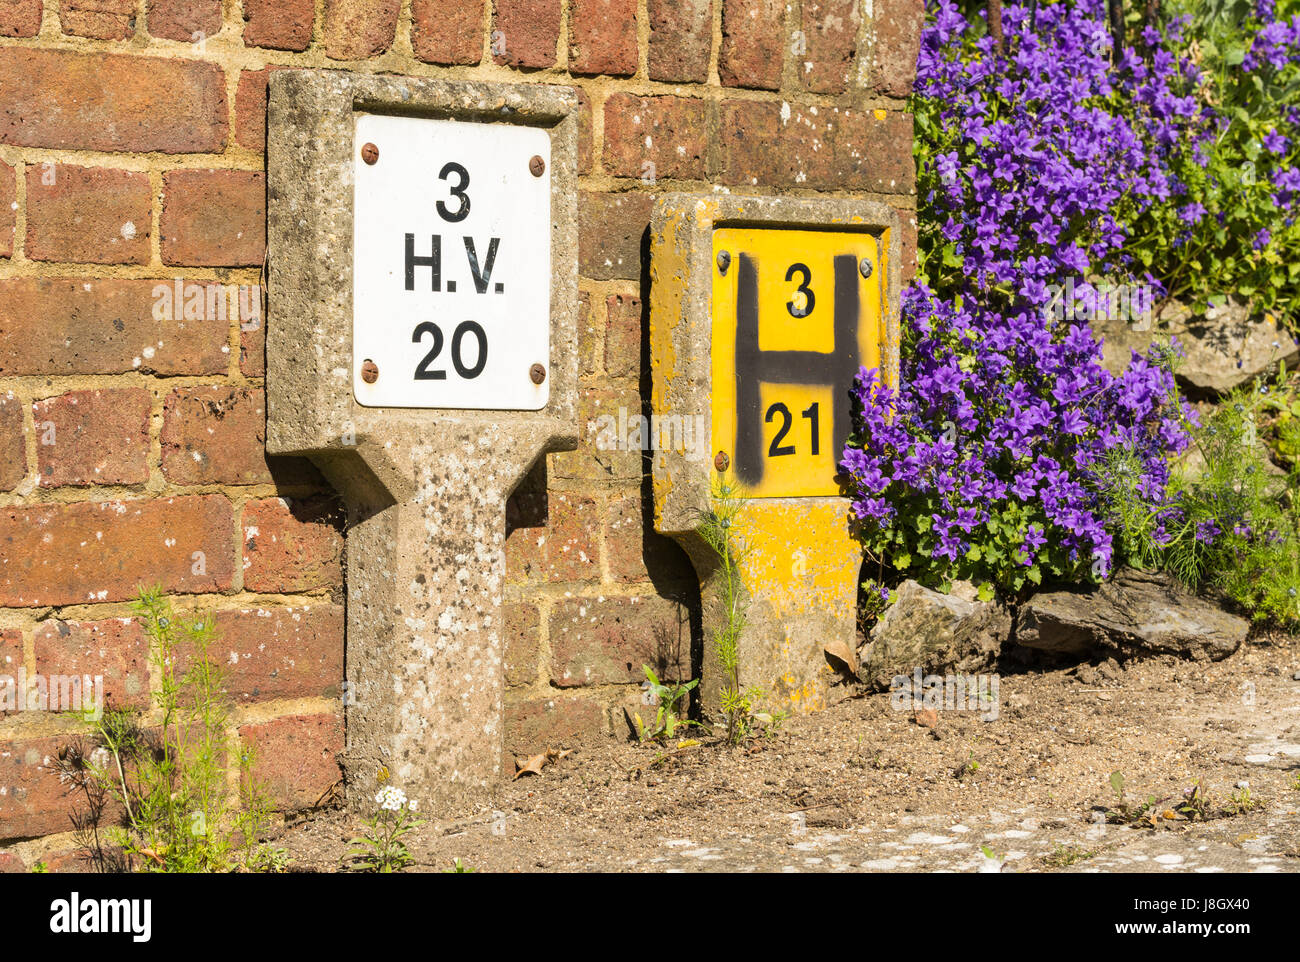 Concrete marker posts for water hydrant and HV in the UK, Stock Photo